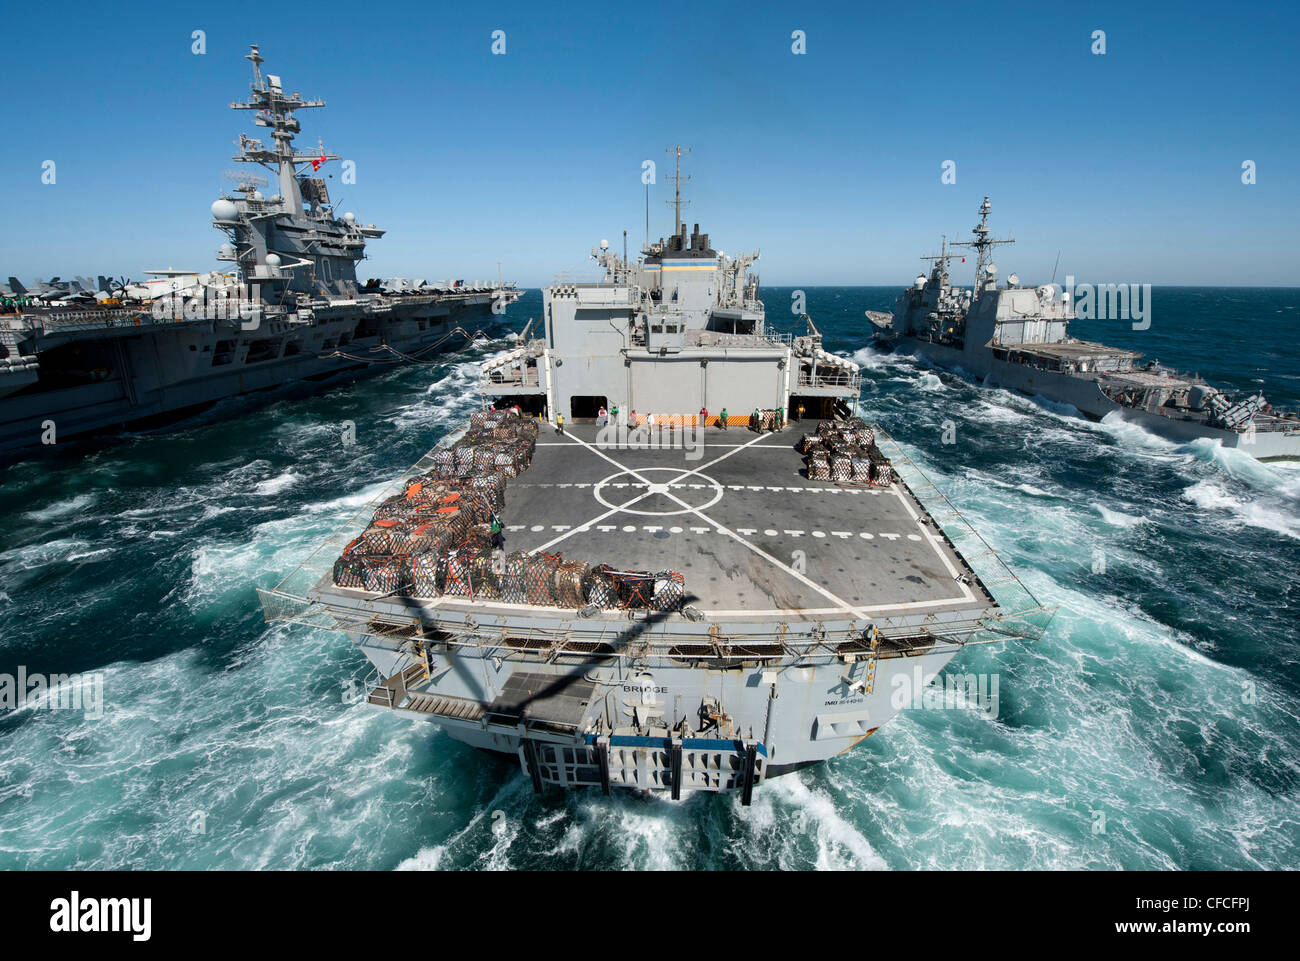 The Military Sealift Command fast combat support ship USNS Bridge (T-AOE 10) prepares to conduct a replenishment at sea with the Nimitz-class aircraft carrier USS Carl Vinson (CVN 70), left, and the Ticonderoga-class guided missile cruiser USS Bunker Hill (CG 52) (CG 52). Carl Vinson and Carrier Air Wing (CVW) 17 are deployed to the U.S. 5th Fleet area of responsibility. Stock Photo